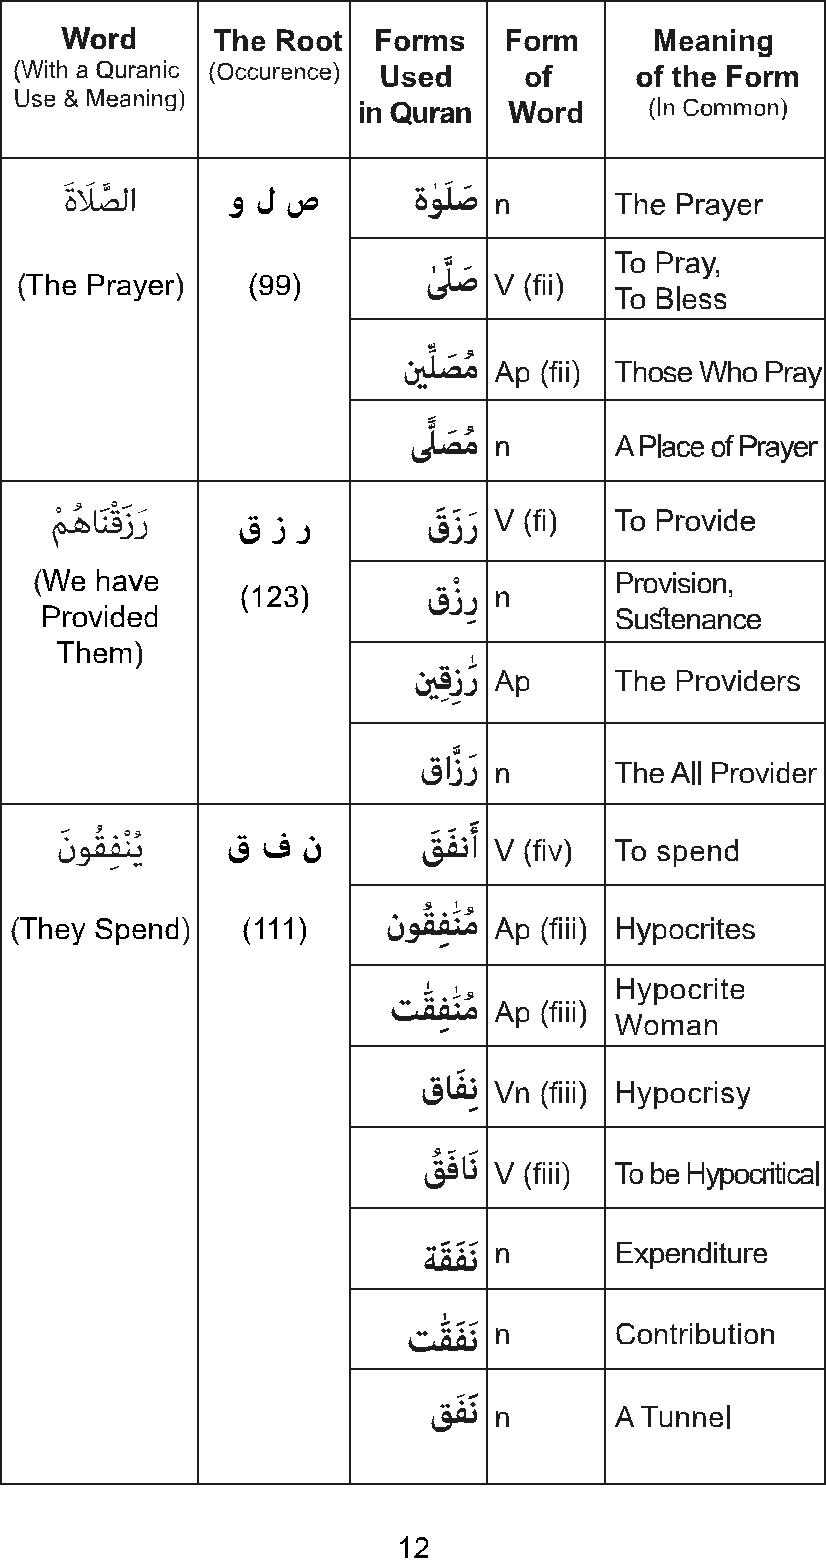 The Golden Words Dictionary of the Holy Quran - The Root Words and Their Forms - photo 14